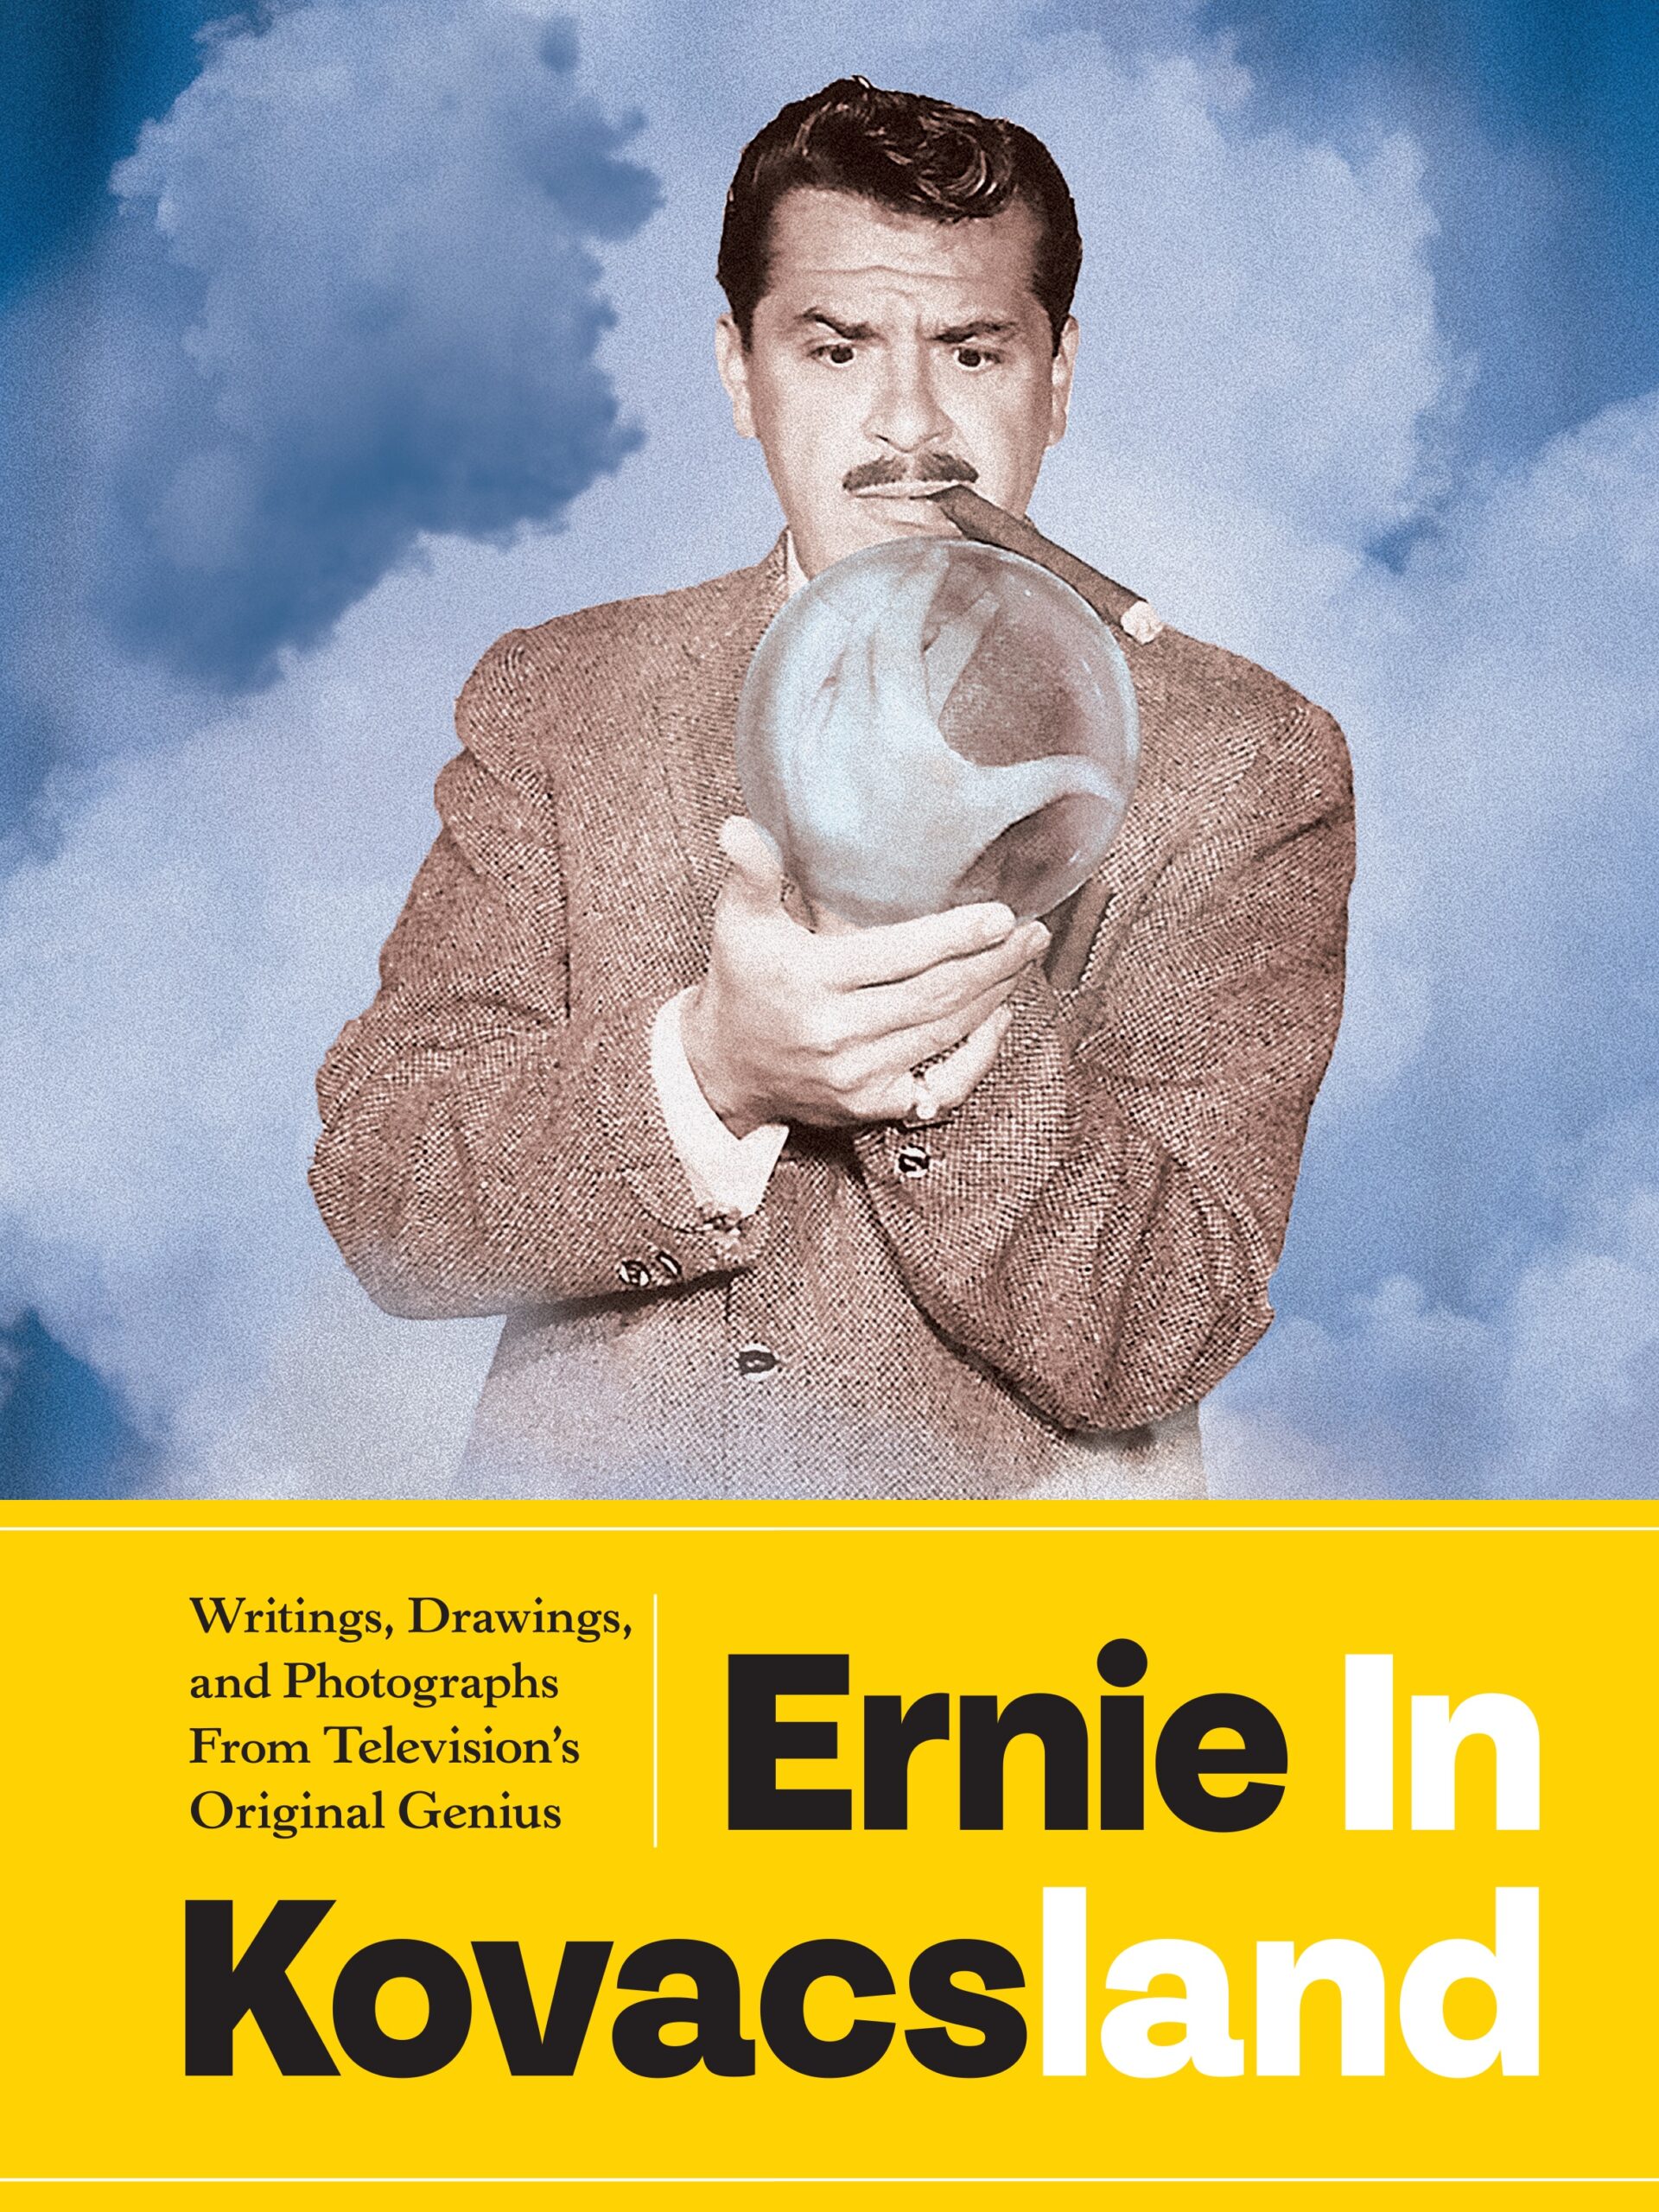 cover of the book, 'Ernie in Kovacsland: Writings, Drawings, and Photographs From Television's Original Genius'